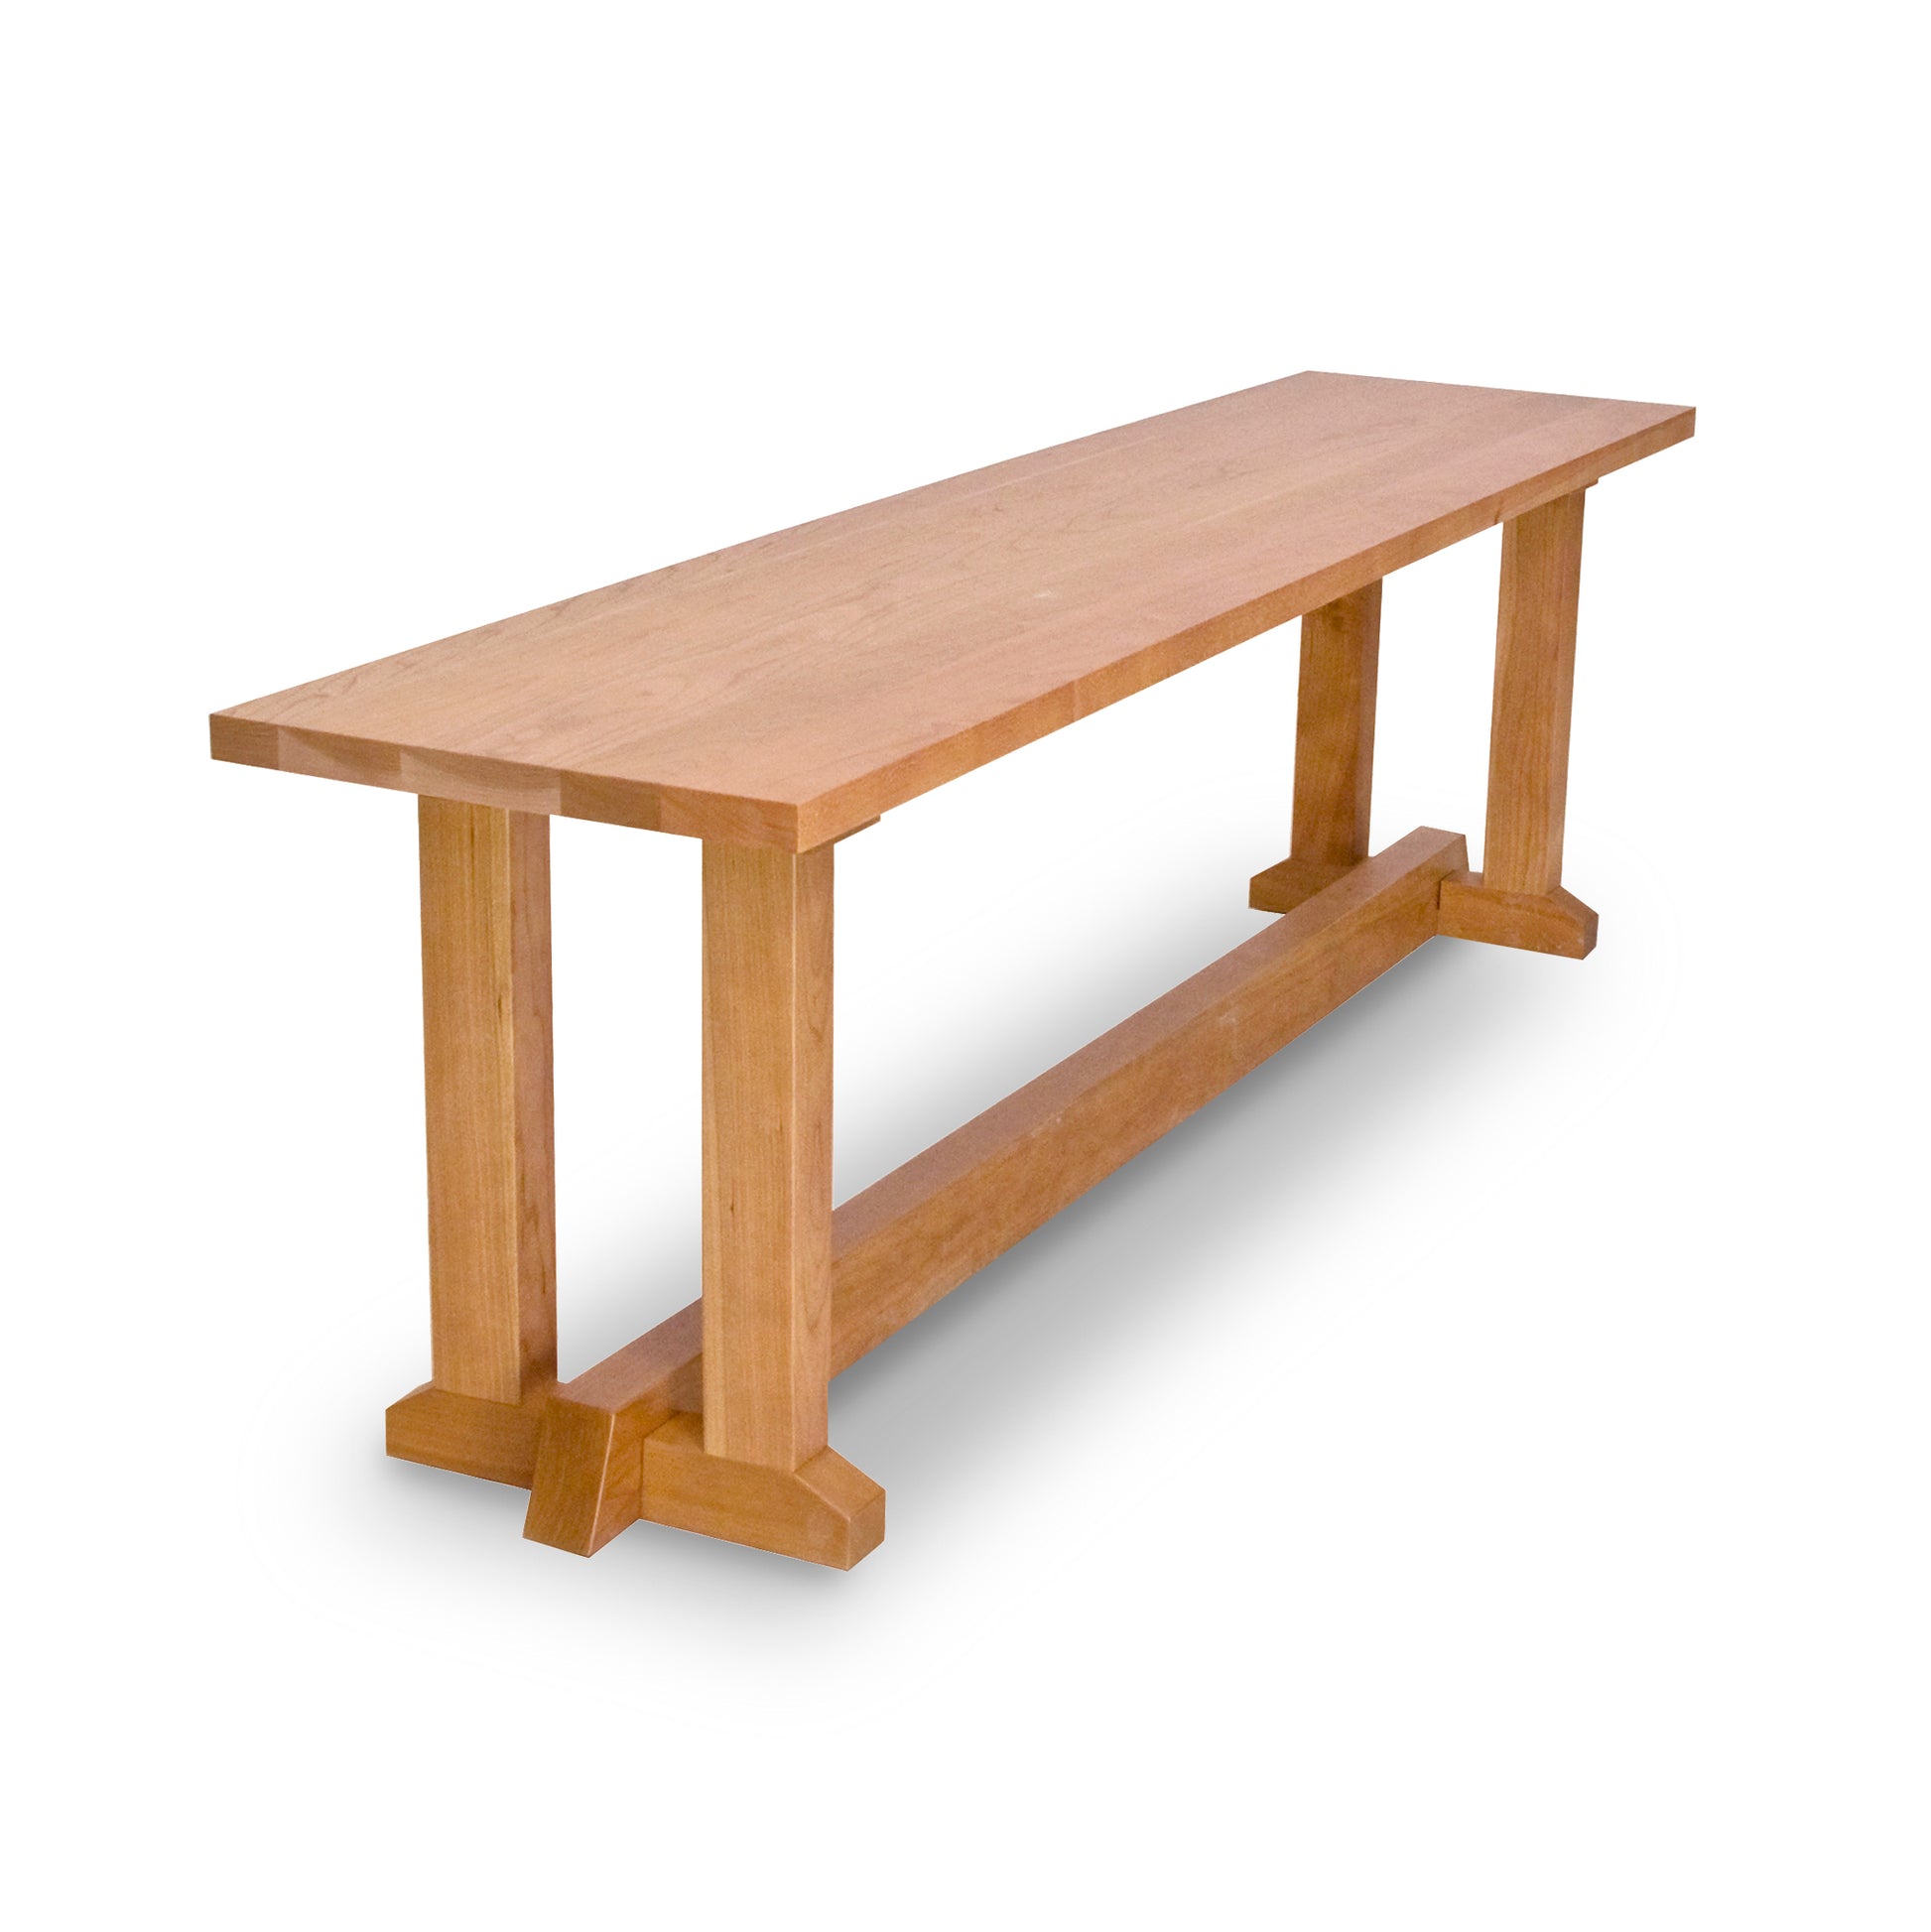 An eco-friendly Lyndon Furniture Boston Trestle Bench with two legs made from sustainably harvested solid woods, displayed on a white background.